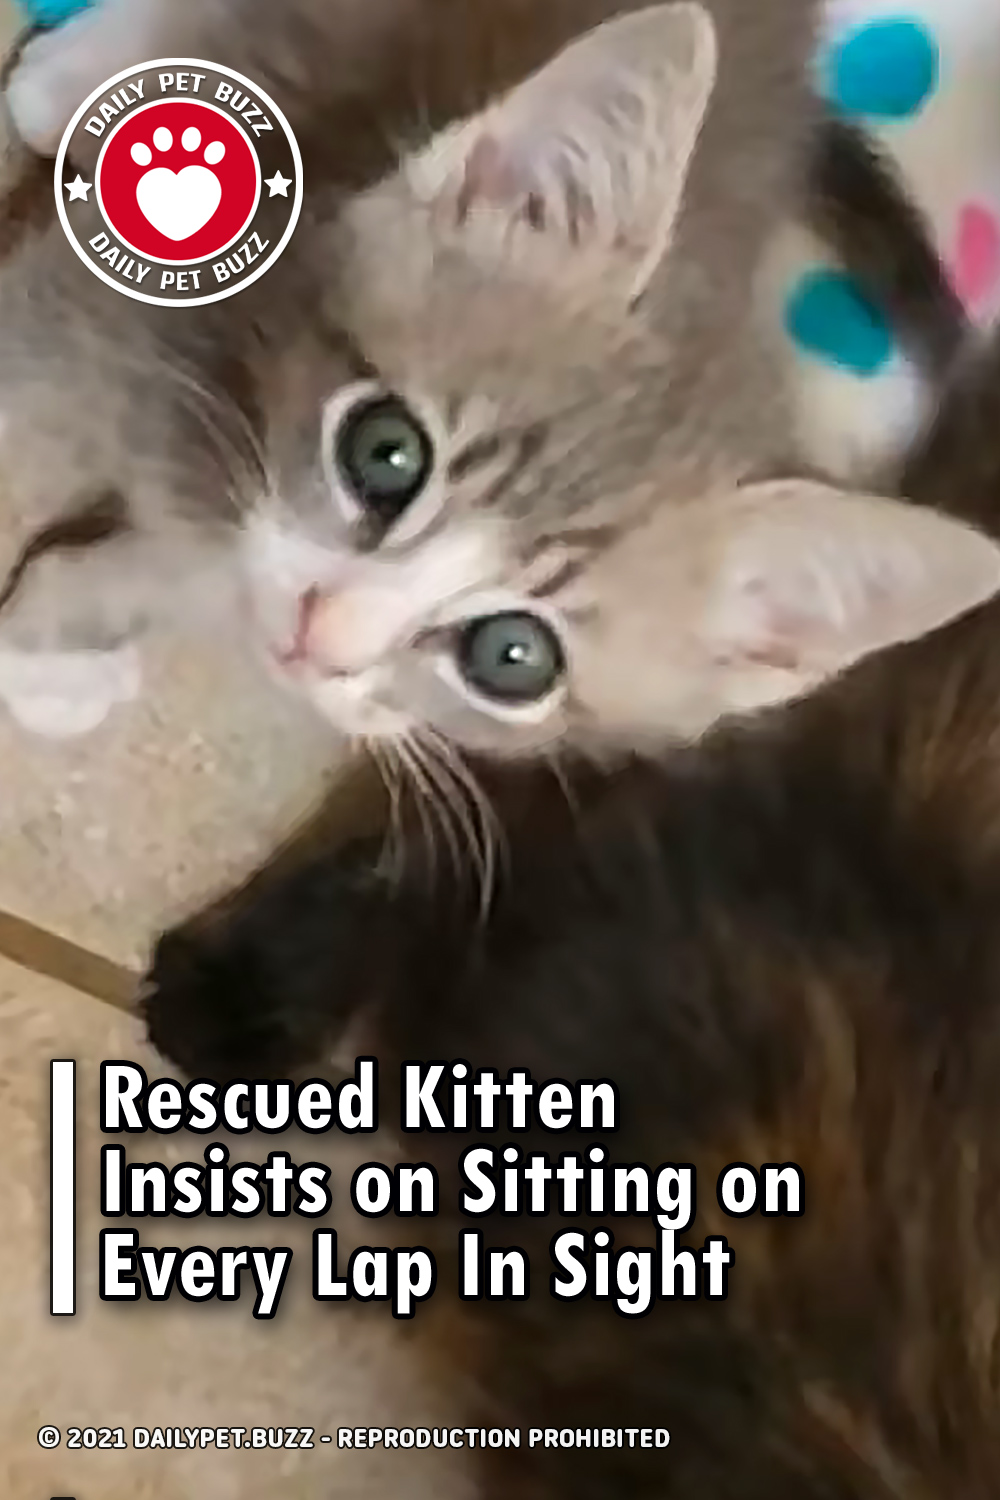 Rescued Kitten Insists on Sitting on Every Lap In Sight